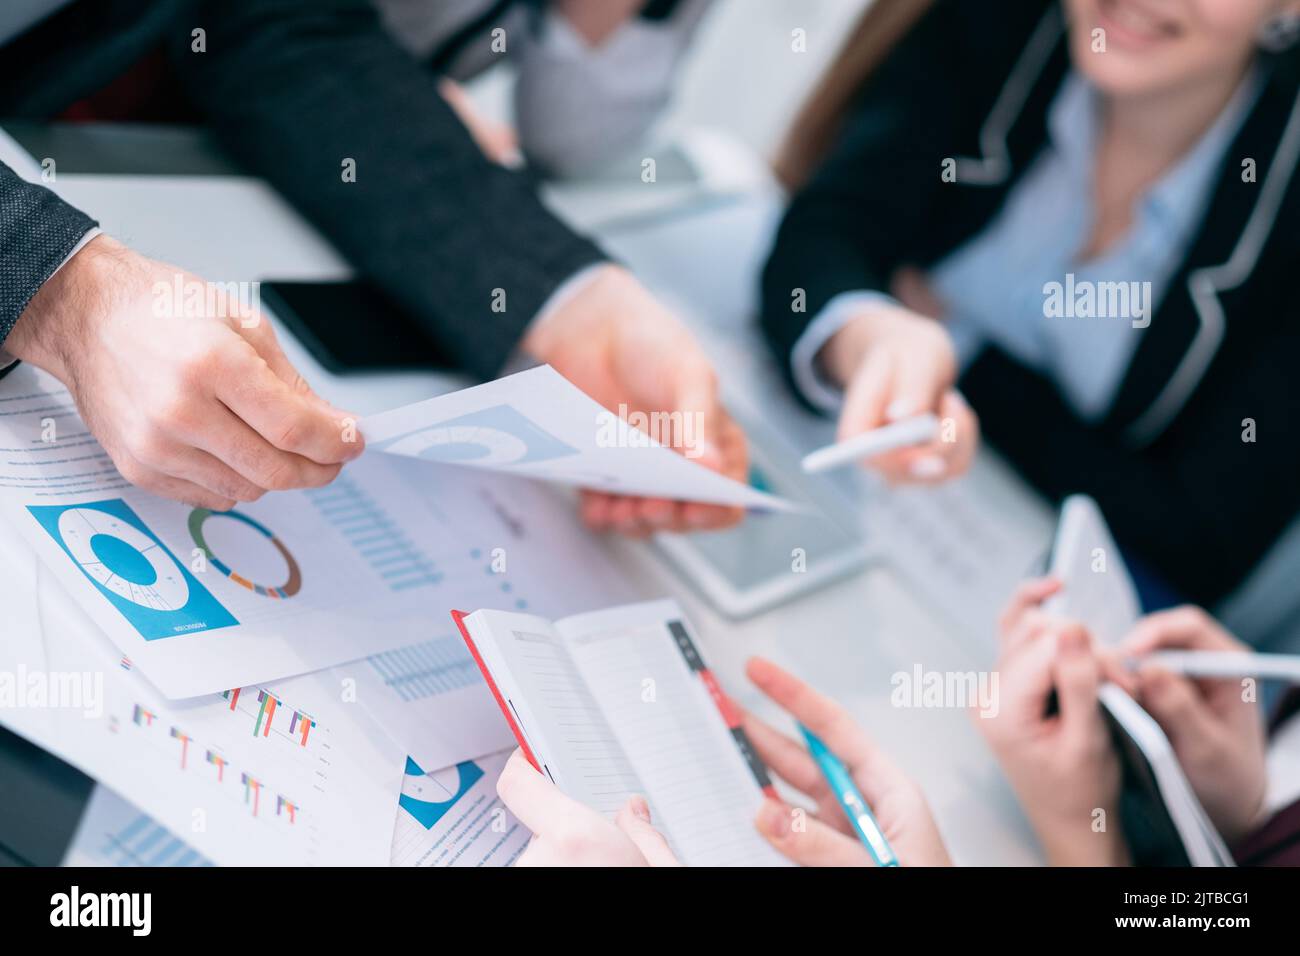 sale analysis business meeting discussion team Stock Photo